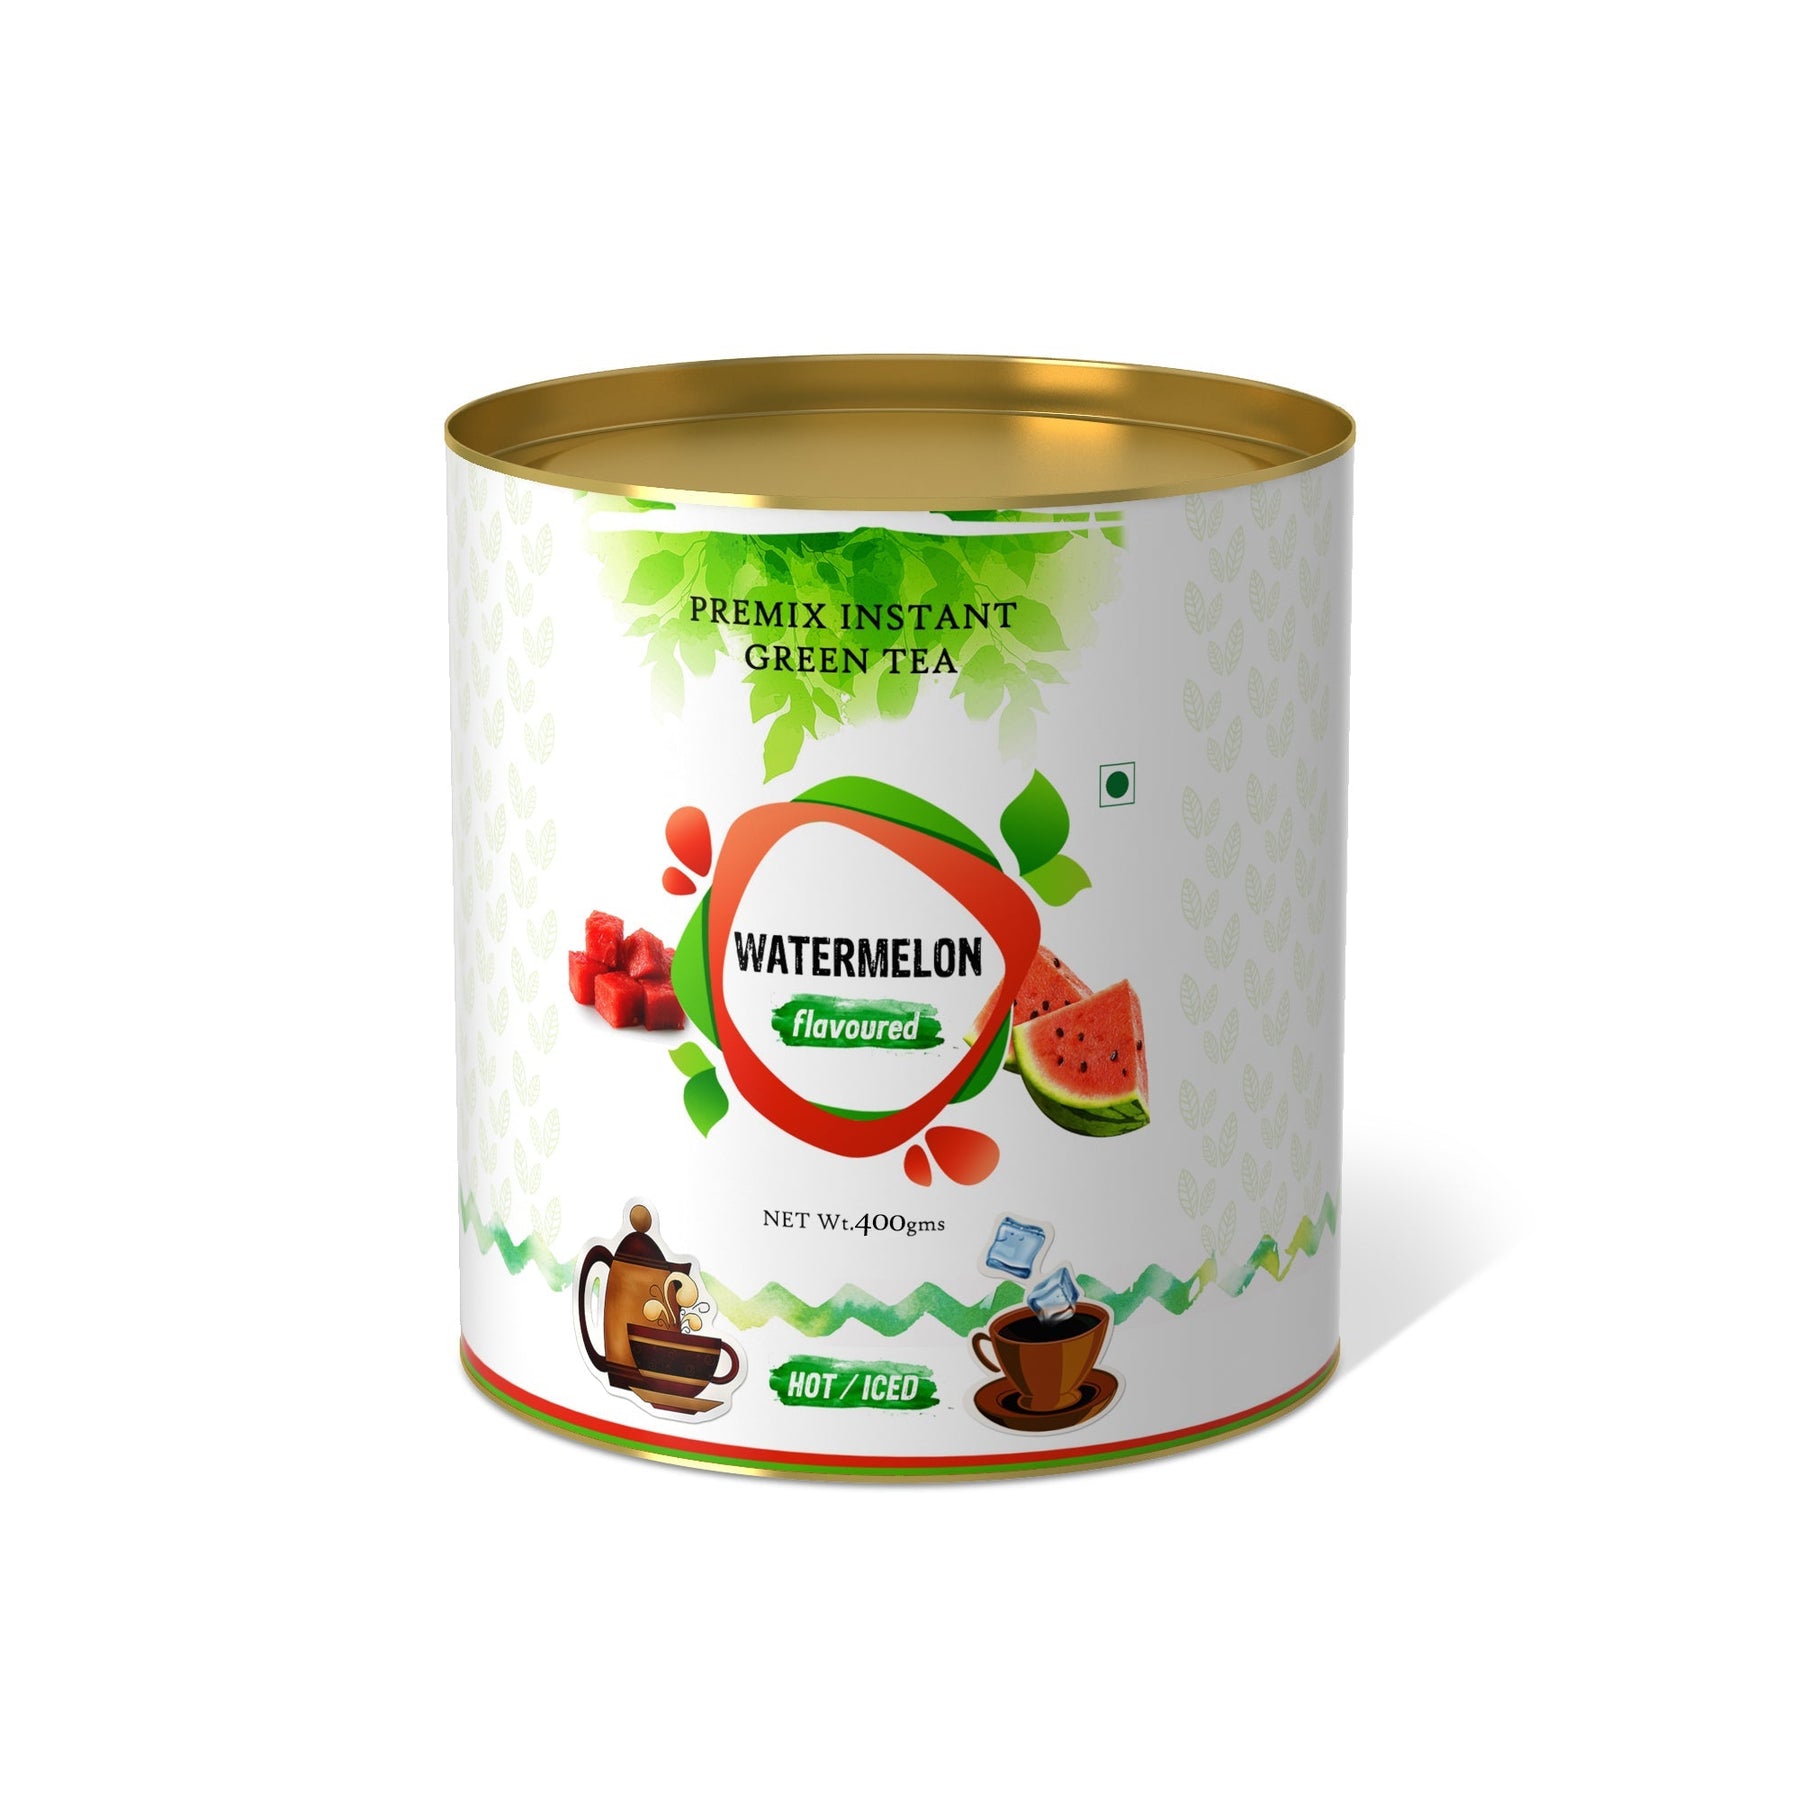 Watermelon Flavored Instant Green Tea - 400 gms